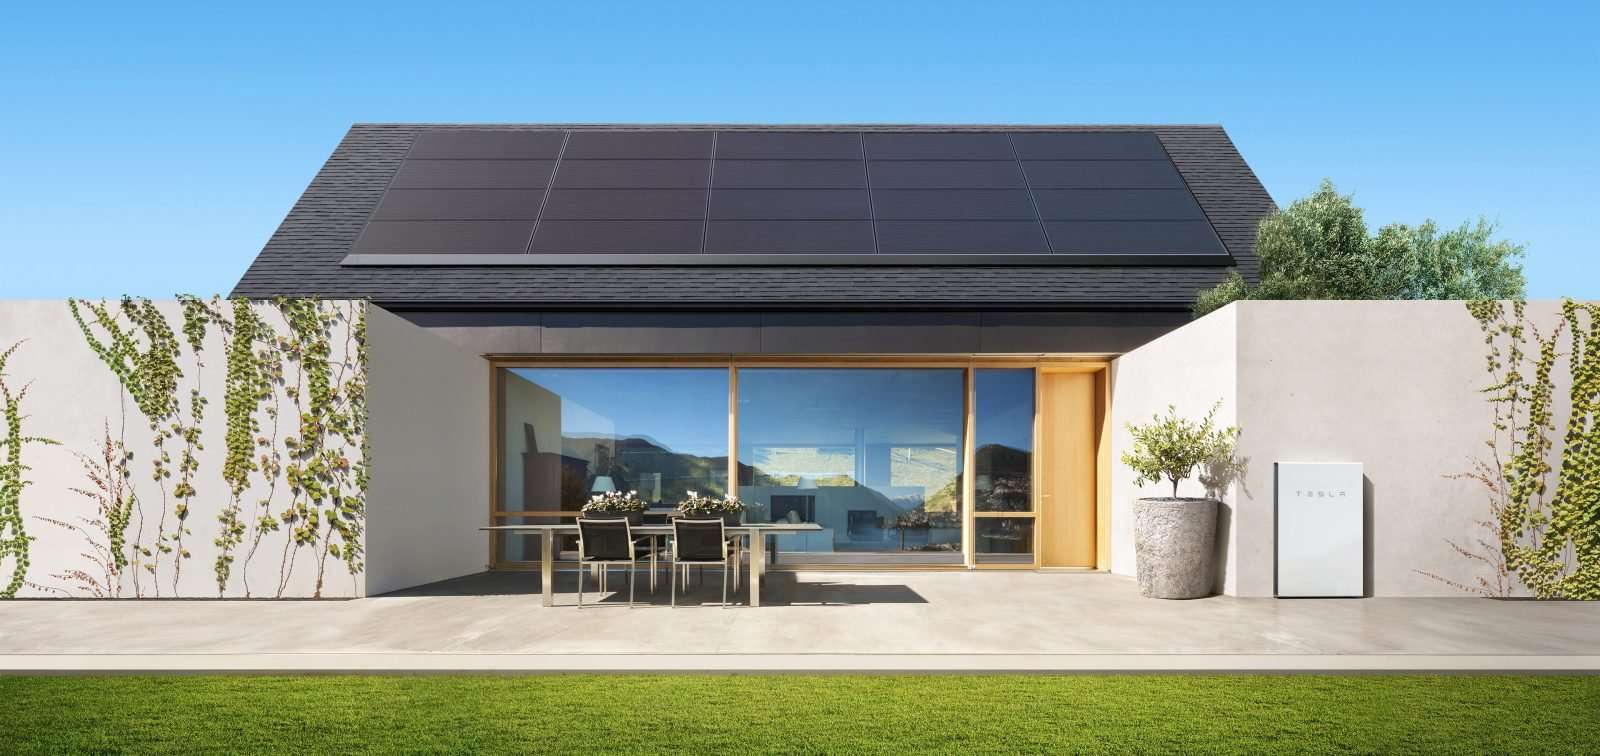 image for Tesla is installing Powerwalls and solar power on 50,000 homes to create biggest virtual power plant in the world